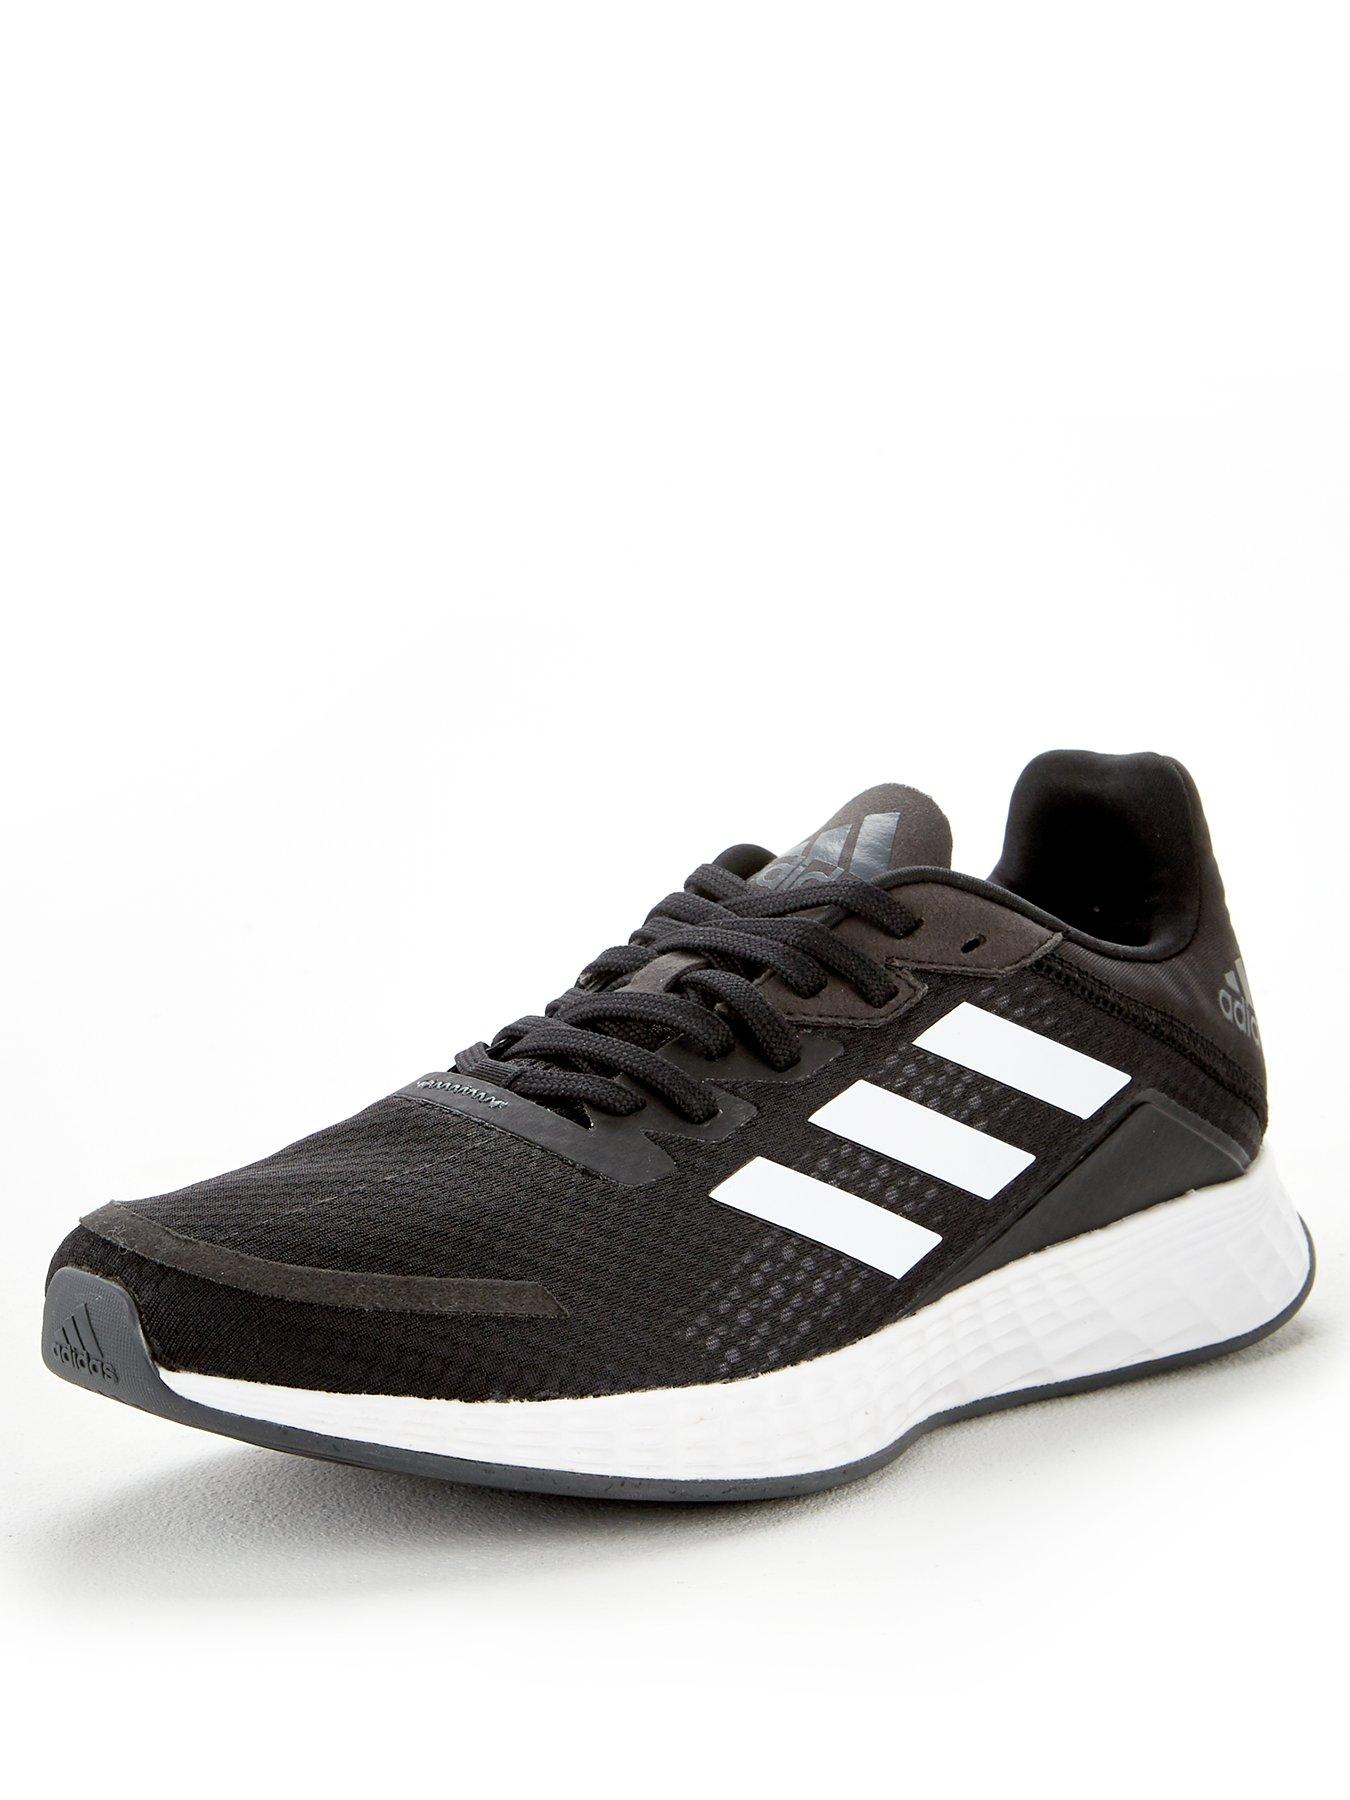 adidas casual trainers uk